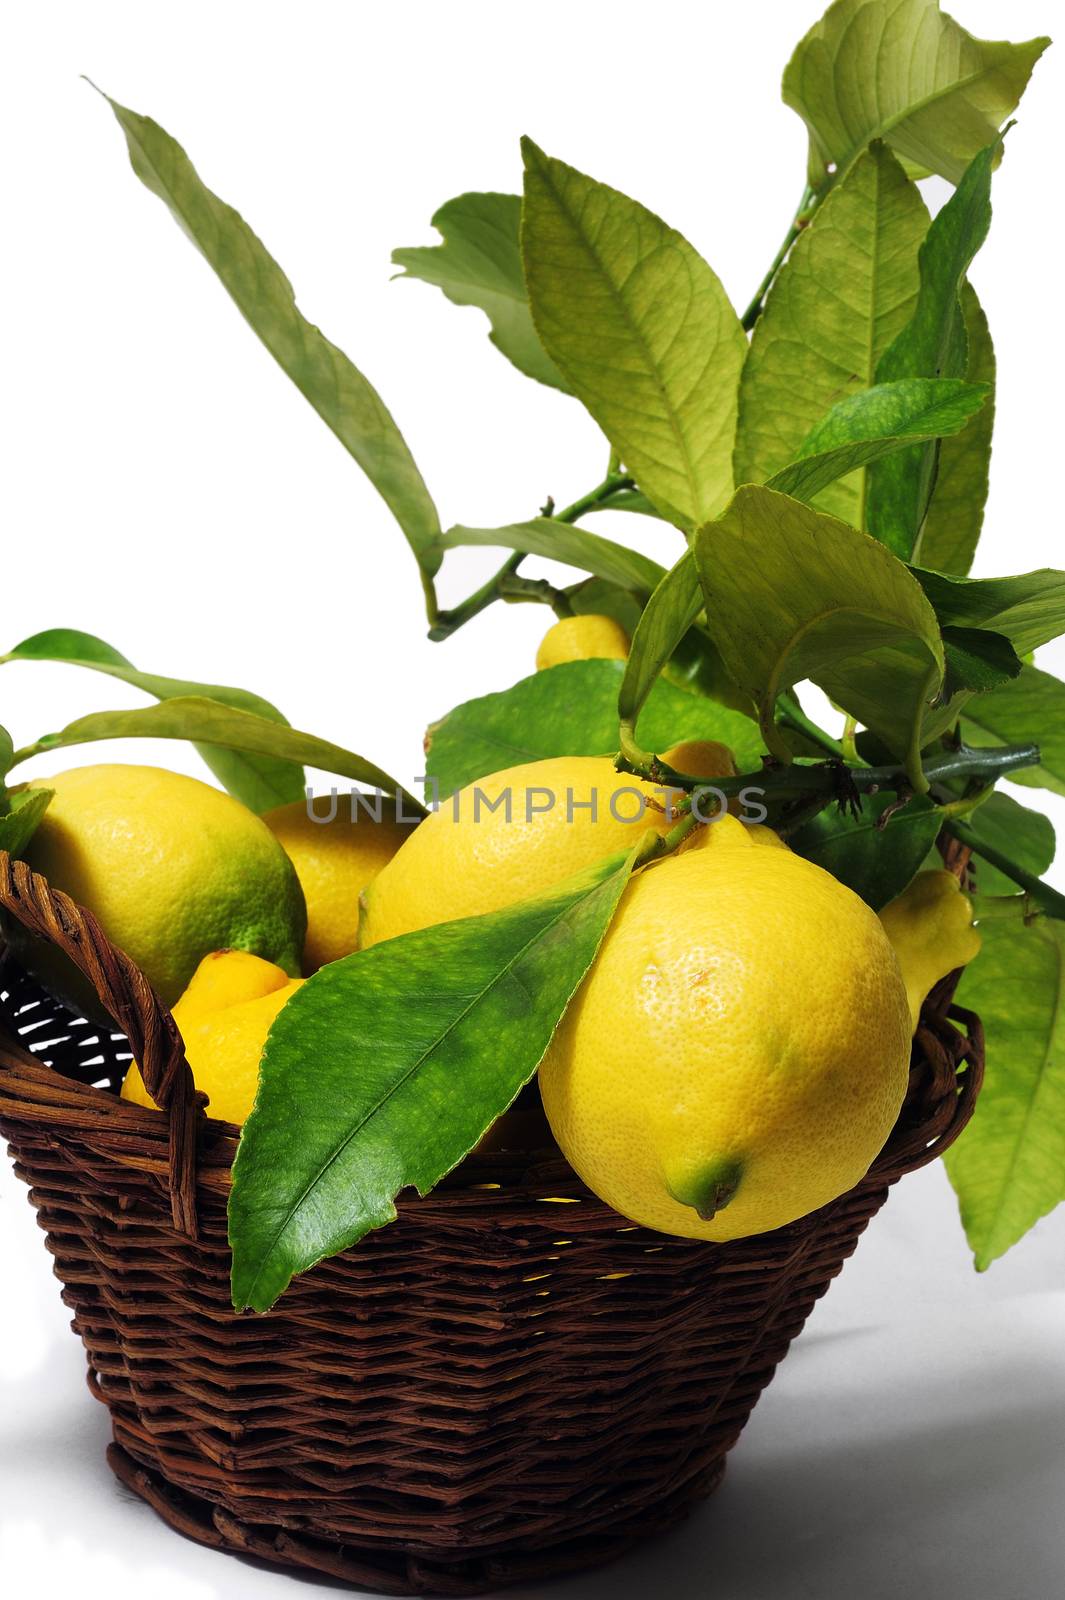 lemons with leaves isolated on white background